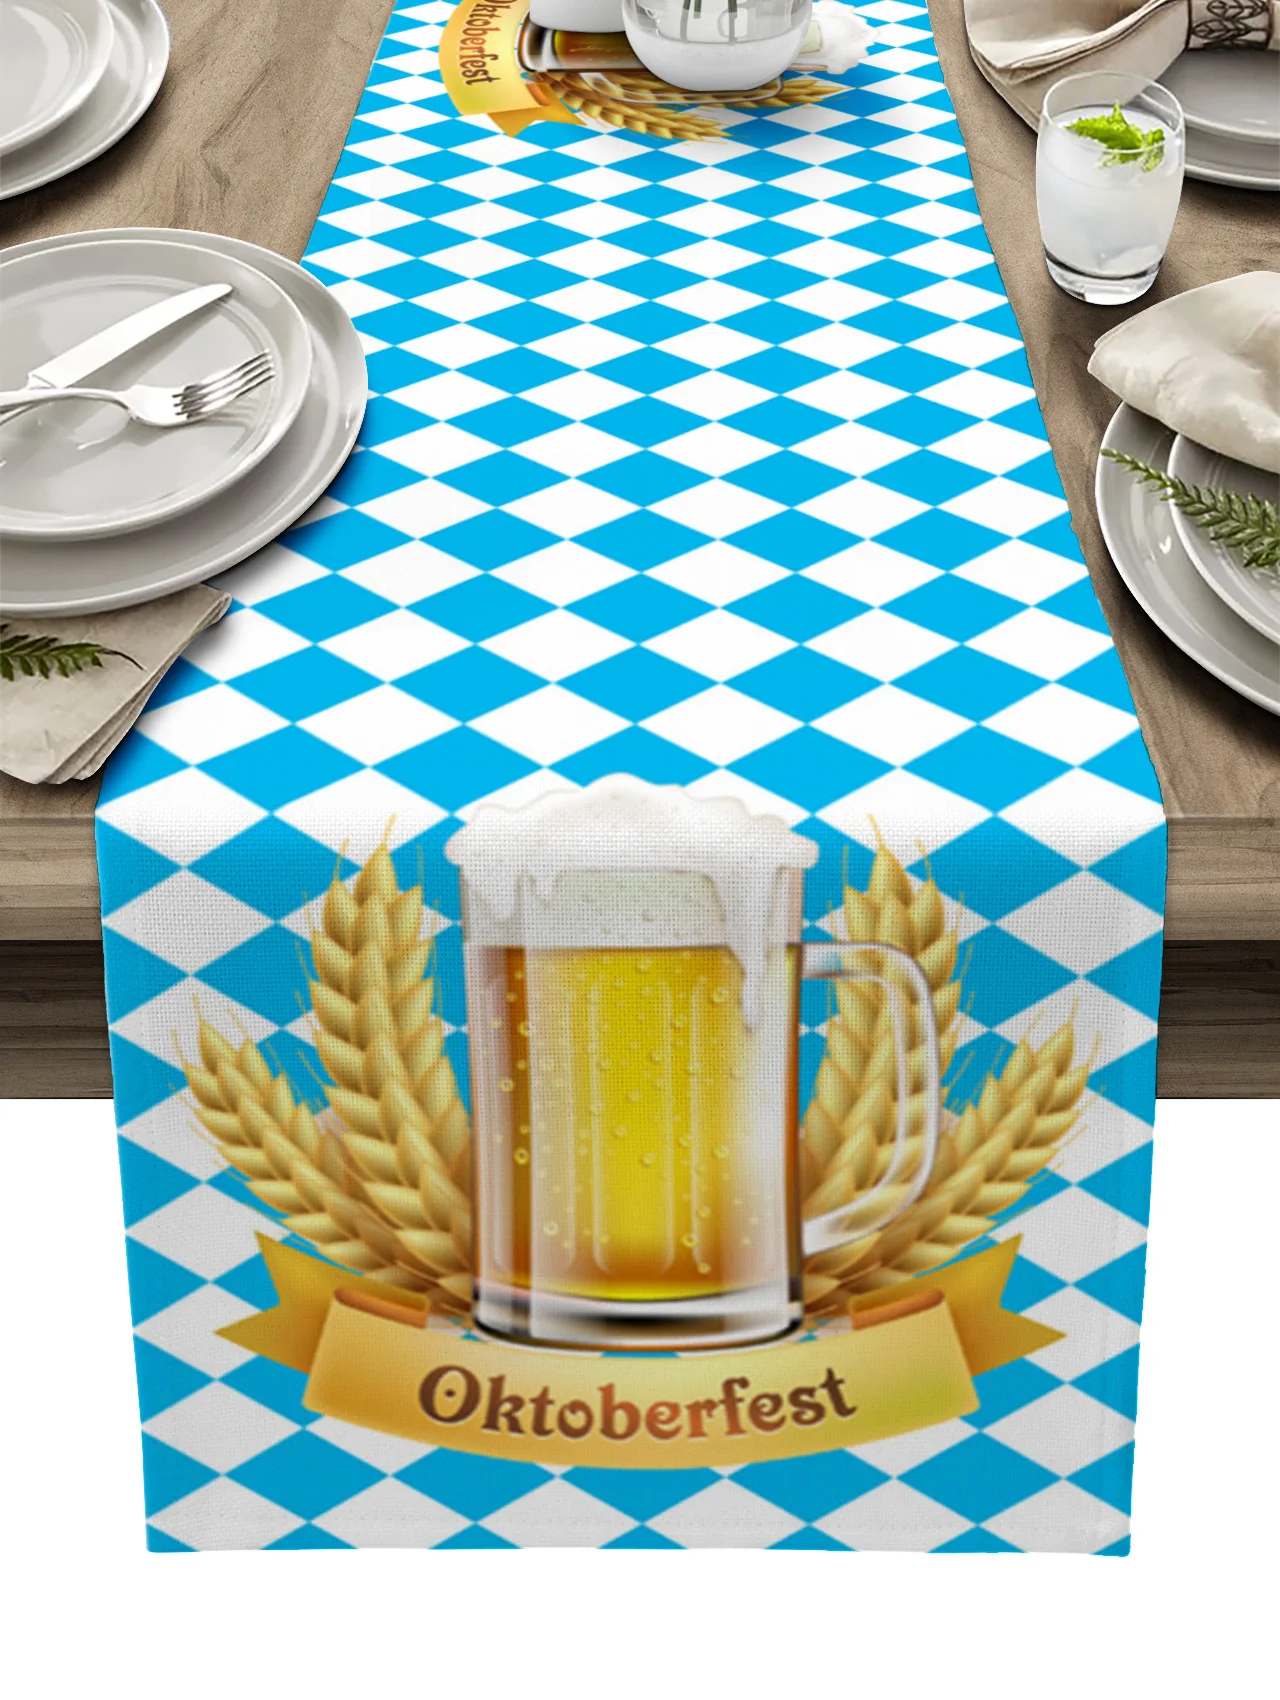 

Oktoberfest Wheat Beer Plaid Table Runner Kitchen Dining Table Decor Tablecloth Wedding Holiday Decor Table Runner